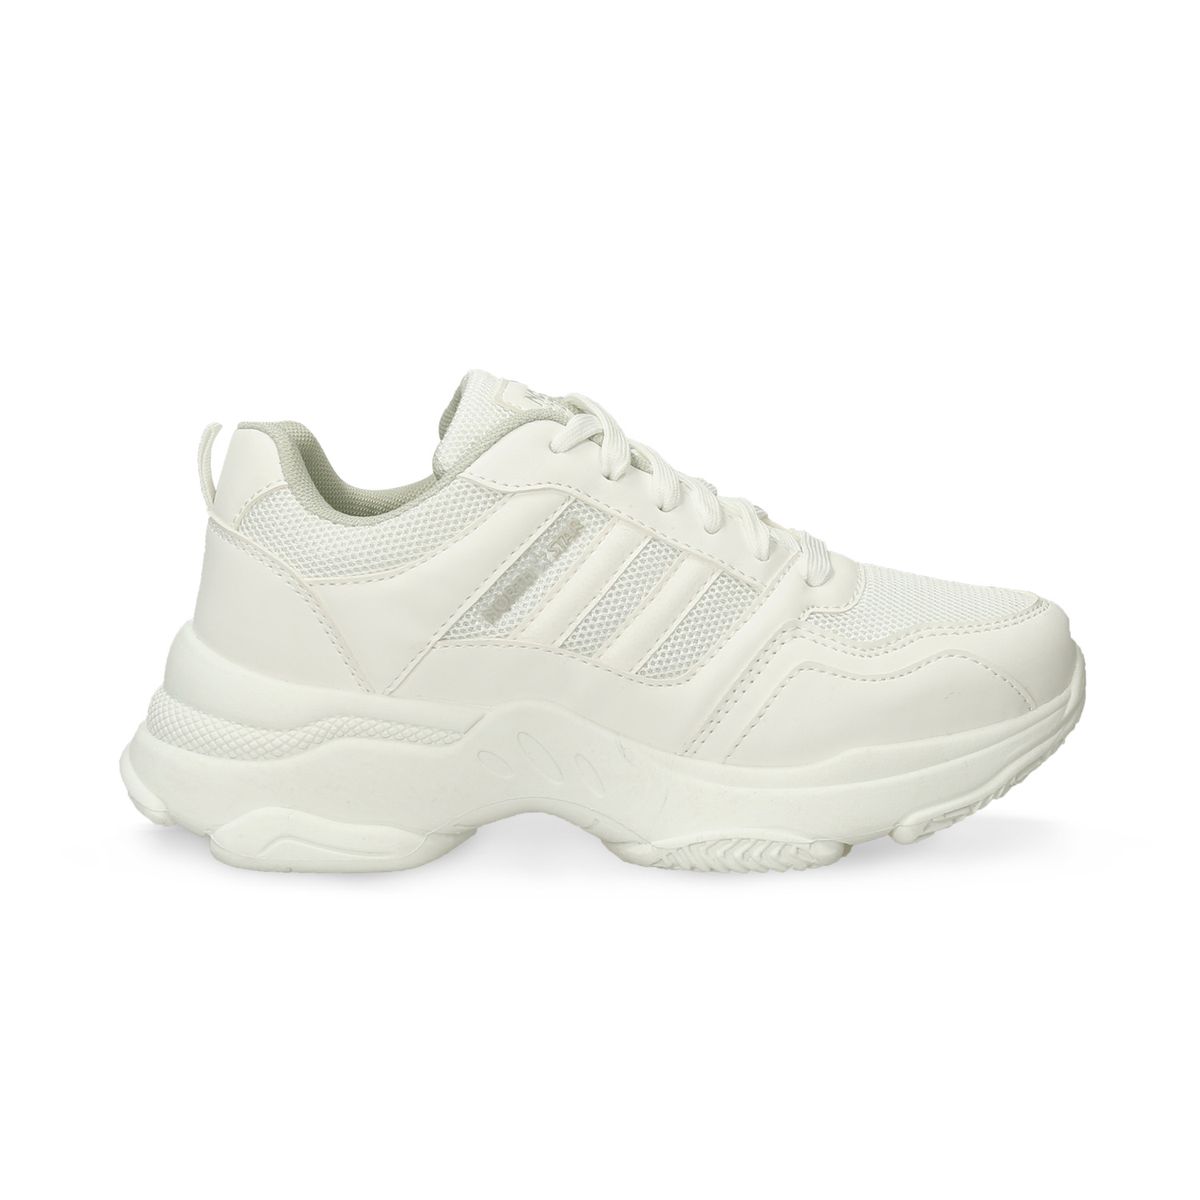 Tenis Casuales Blanco North Star Ingrid Aoon Mujer